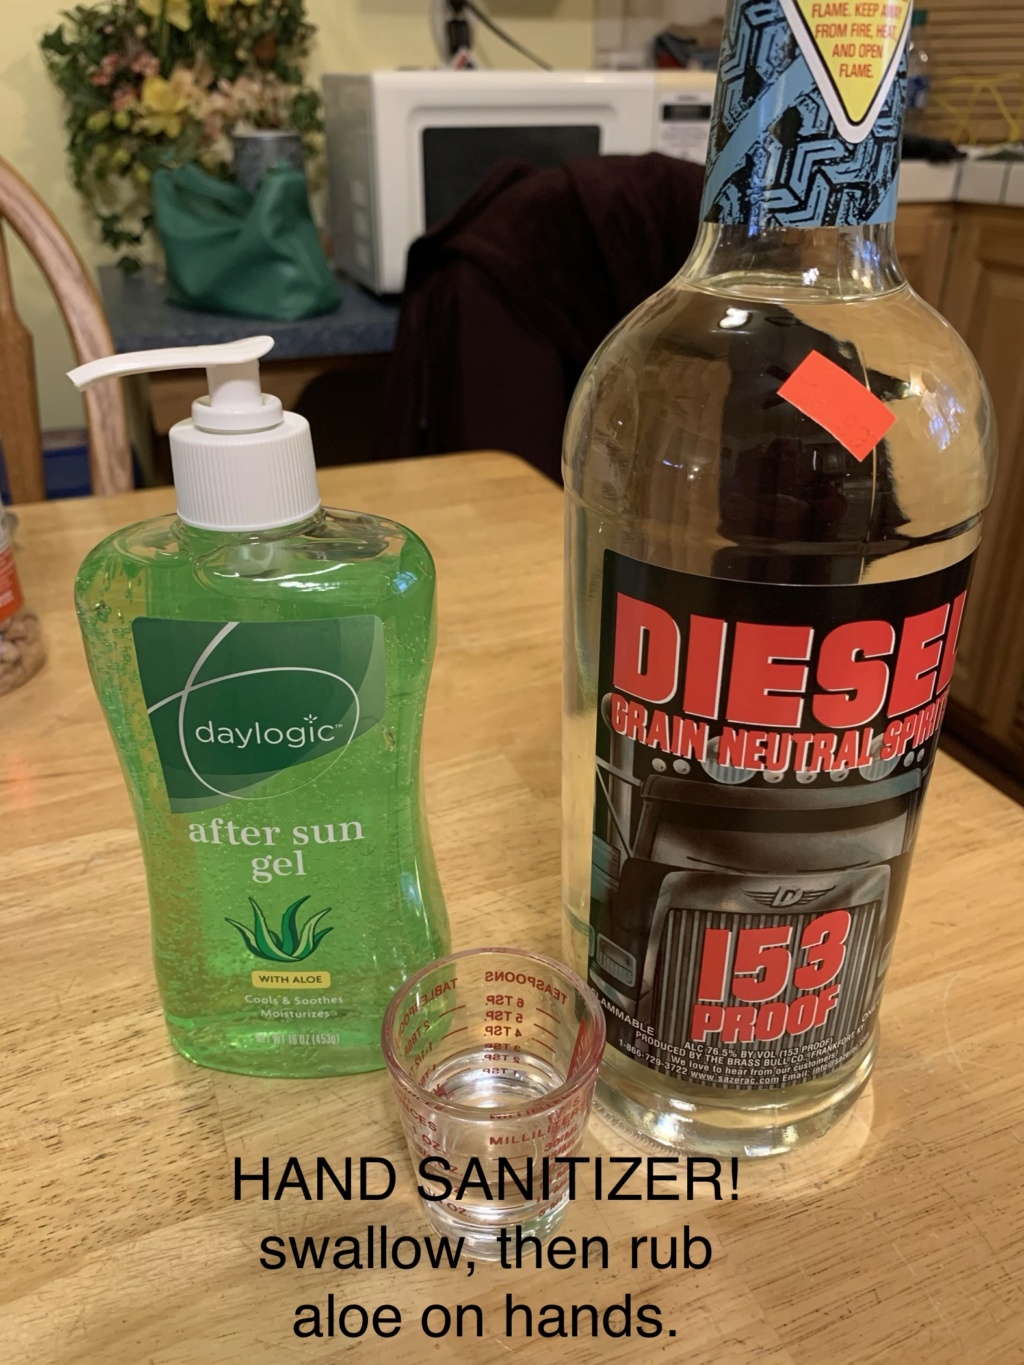 hand sanitizers and group tighteners 55e66410